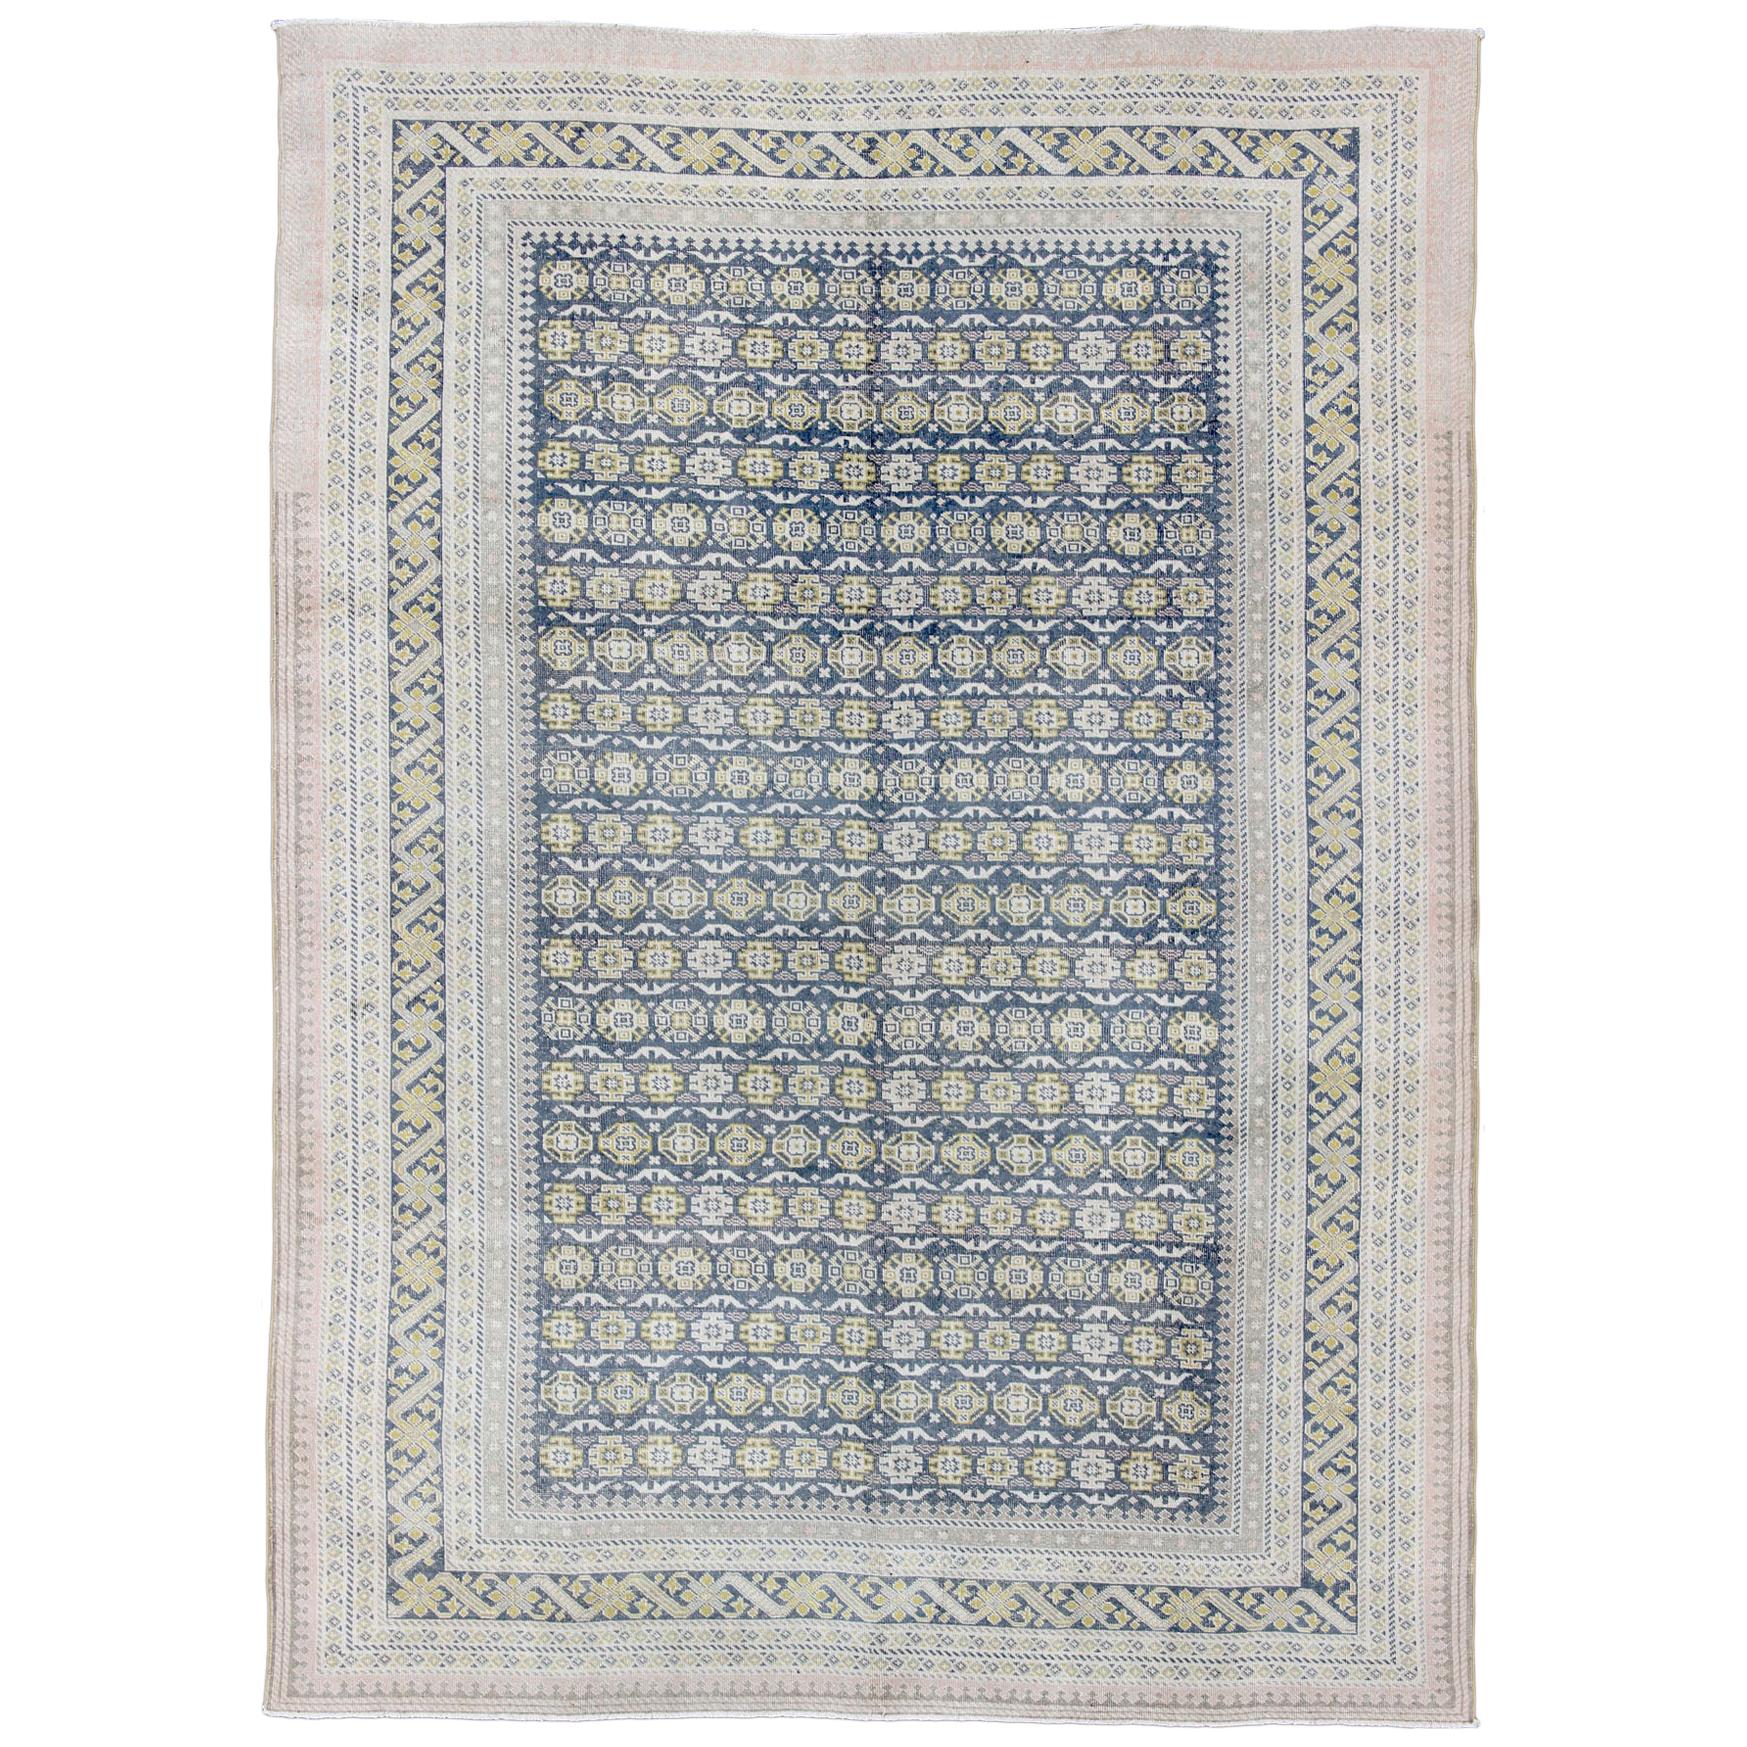 Antique Khotan Rug in Shades of Blue with Gray, L. Pink and Yellow Accents For Sale